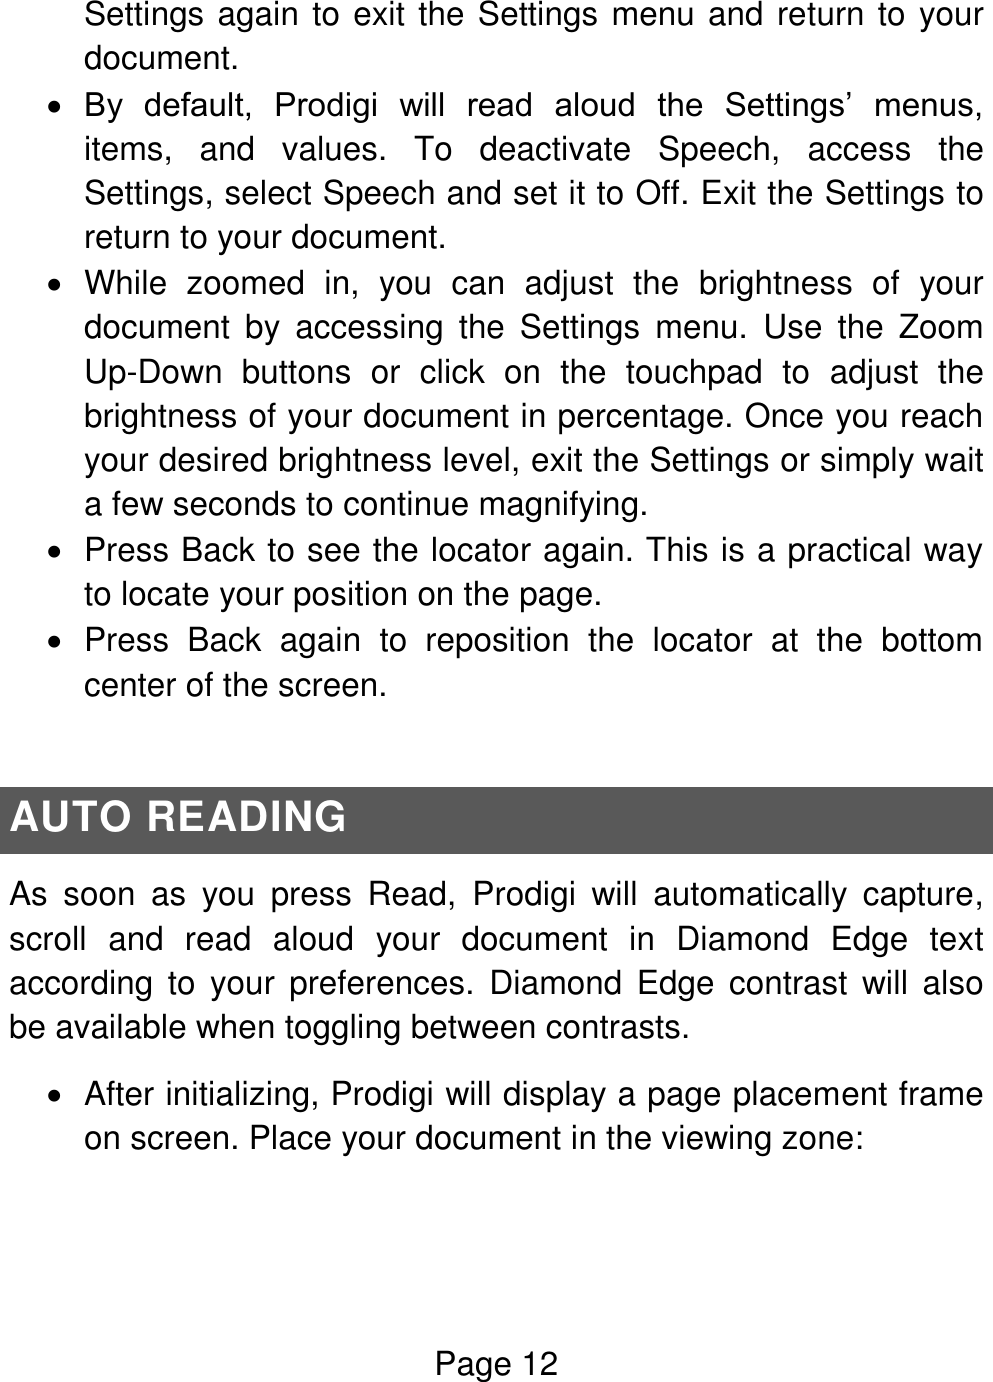 Page 12  Settings again to exit the Settings menu and return to your document.  By  default,  Prodigi  will  read  aloud  the  Settings’  menus, items,  and  values.  To  deactivate  Speech,  access  the Settings, select Speech and set it to Off. Exit the Settings to return to your document.   While  zoomed  in,  you  can  adjust  the  brightness  of  your document  by  accessing  the  Settings  menu.  Use  the  Zoom Up-Down  buttons  or  click  on  the  touchpad  to  adjust  the brightness of your document in percentage. Once you reach your desired brightness level, exit the Settings or simply wait a few seconds to continue magnifying.    Press Back to see the locator again. This is a practical way to locate your position on the page.    Press  Back  again  to  reposition  the  locator  at  the  bottom center of the screen.  AUTO READING As  soon  as  you  press  Read,  Prodigi  will  automatically  capture, scroll  and  read  aloud  your  document  in  Diamond  Edge  text according  to  your  preferences.  Diamond  Edge  contrast  will  also be available when toggling between contrasts.   After initializing, Prodigi will display a page placement frame on screen. Place your document in the viewing zone: 